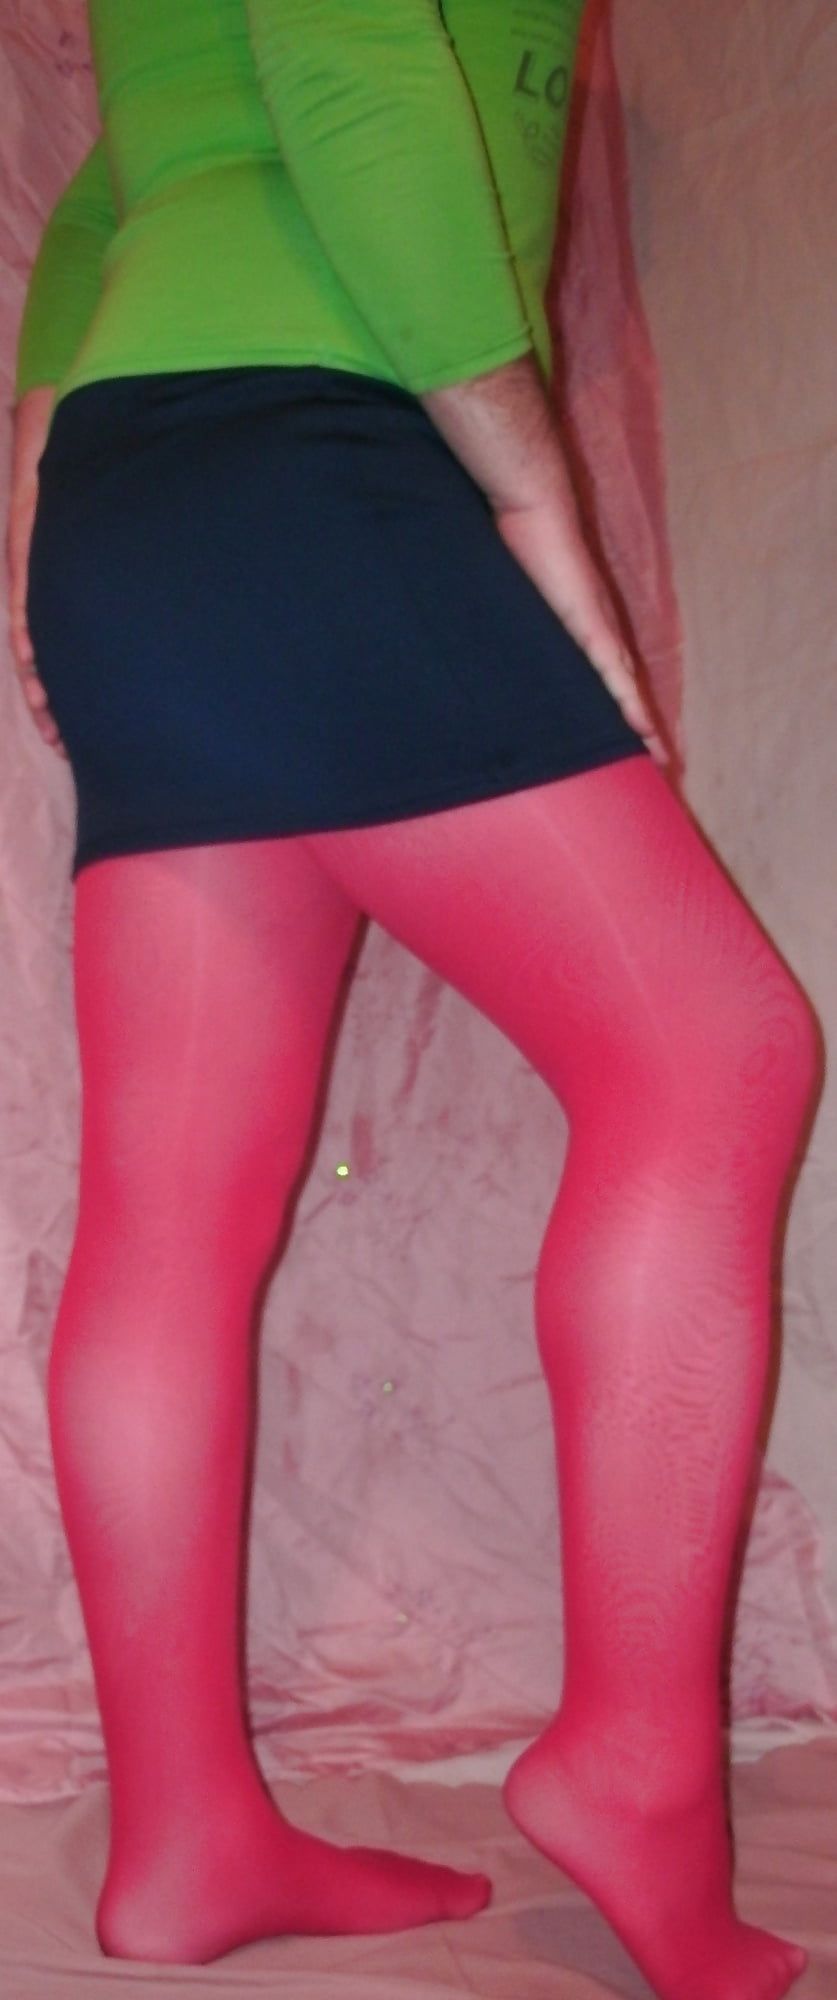 Red stockings 2 #5